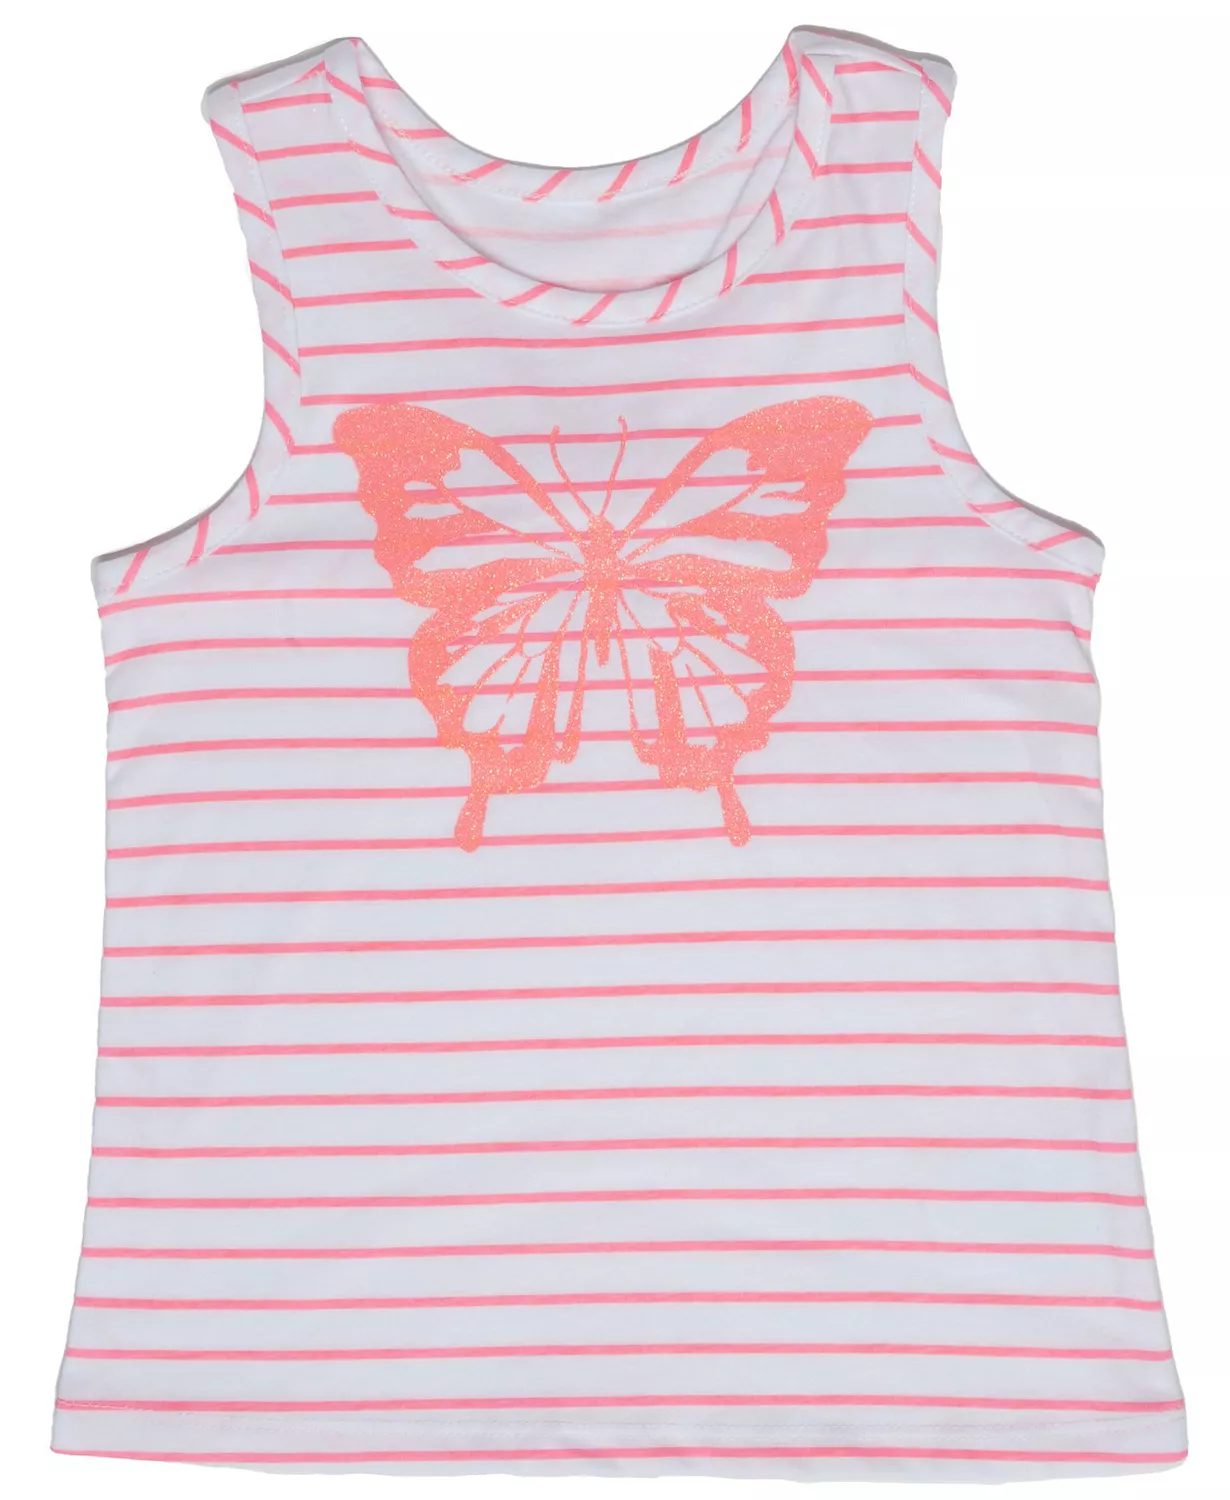 17540179 fpx - Girls Tank Tops at Macys for $3.16